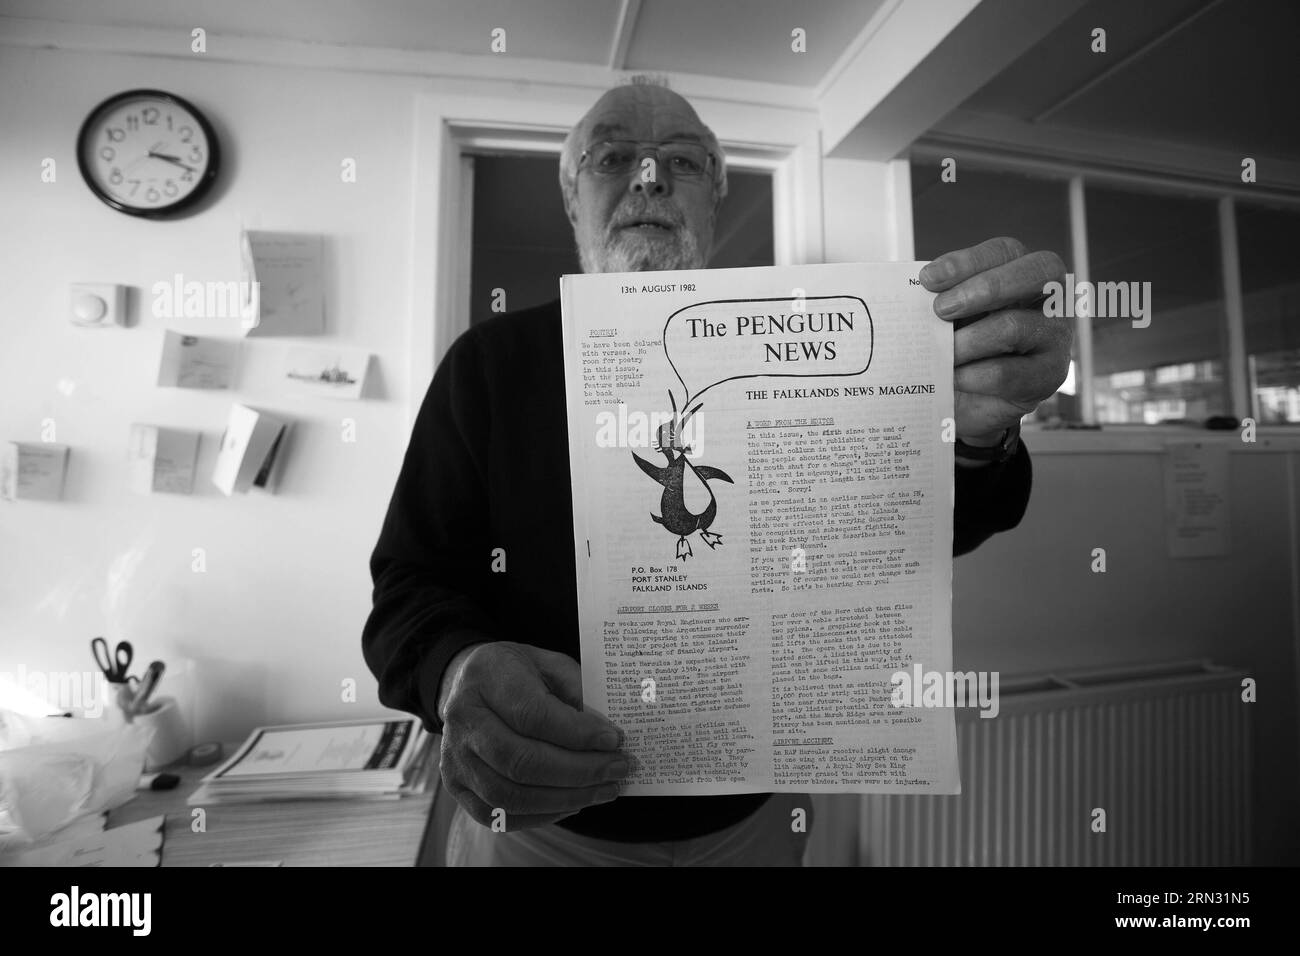 (150402) -- PUERTO ARGENTINO, Apr. 2, 2015 -- Image taken on Apr. 4, 2012, shows John Fowler, the sub-editor of the only local newspaper Penguin News, showing a publication of 1982 after the war in Puerto Argentino, Falkland Islands. Argentine Foreign Minister Hector Timerman on March 30, 2015 wrote to international organizations to denounce Britain for boosting military presence in the Malvinas Islands, known as the Falklands in the European country. Britain and Argentina went to war over the islands in 1982, after Argentina ventured to reclaim the territory by sending a naval force. Britain Stock Photo